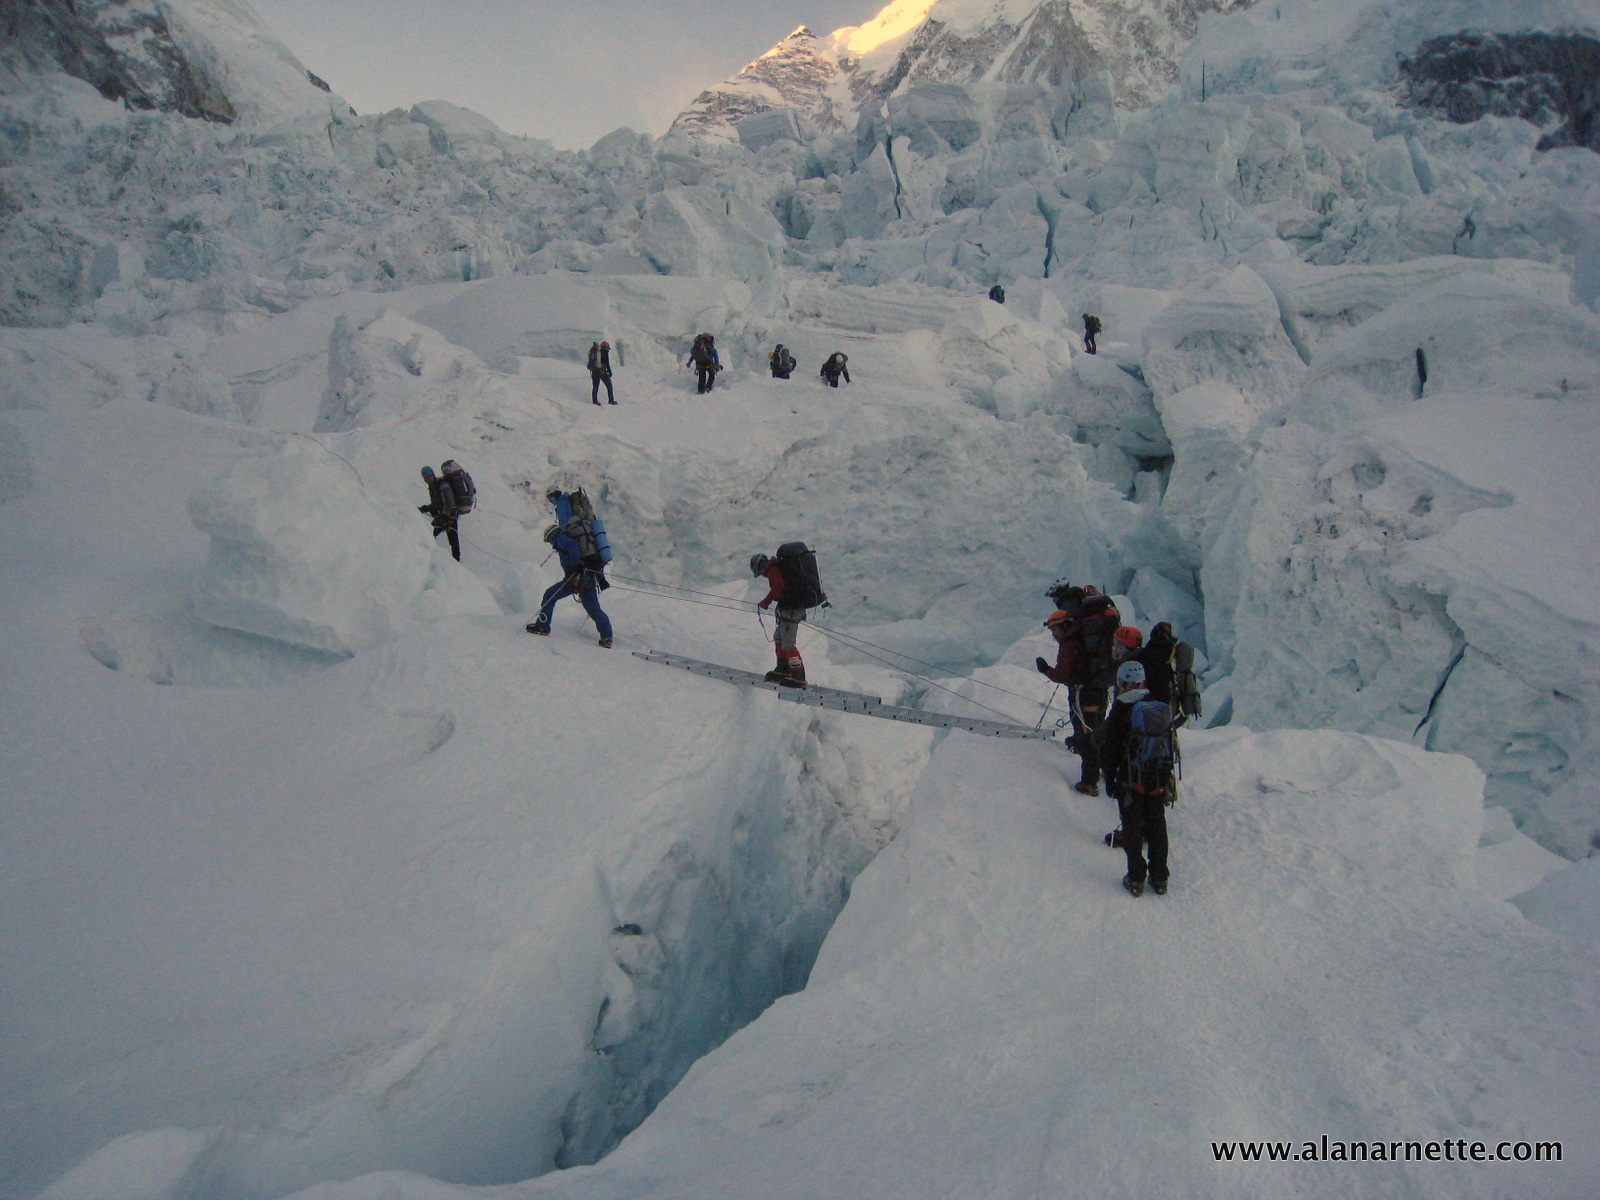 Everest 2017: Why is the Khumbu Icefall so Dangerous? | The Blog on ...